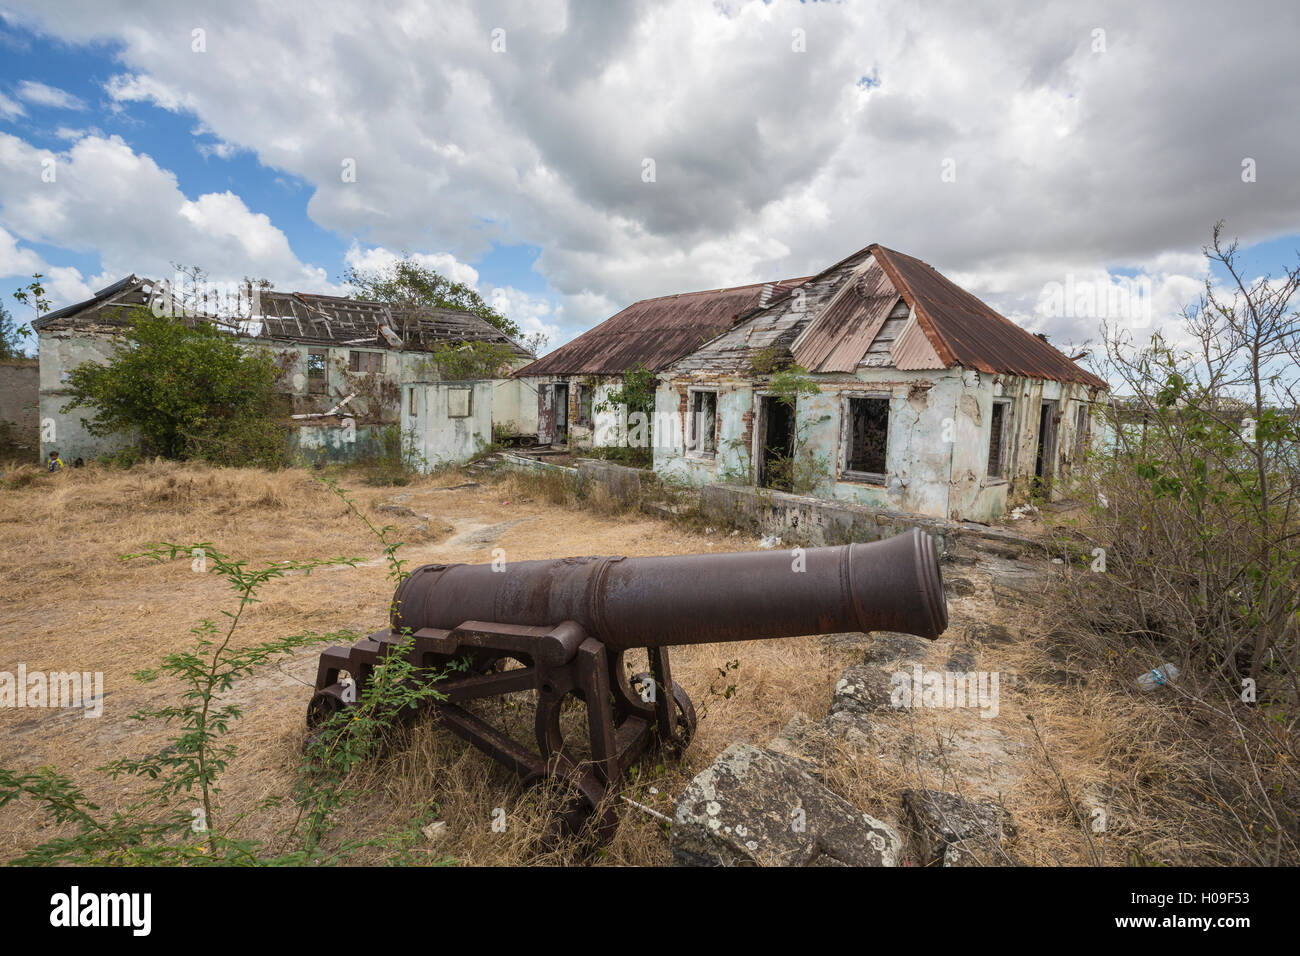 Cannon around the ruined buildings at Fort Saint James, St. John's, Antigua, Antigua and Barbuda, Leeward Islands, West Indies Stock Photo